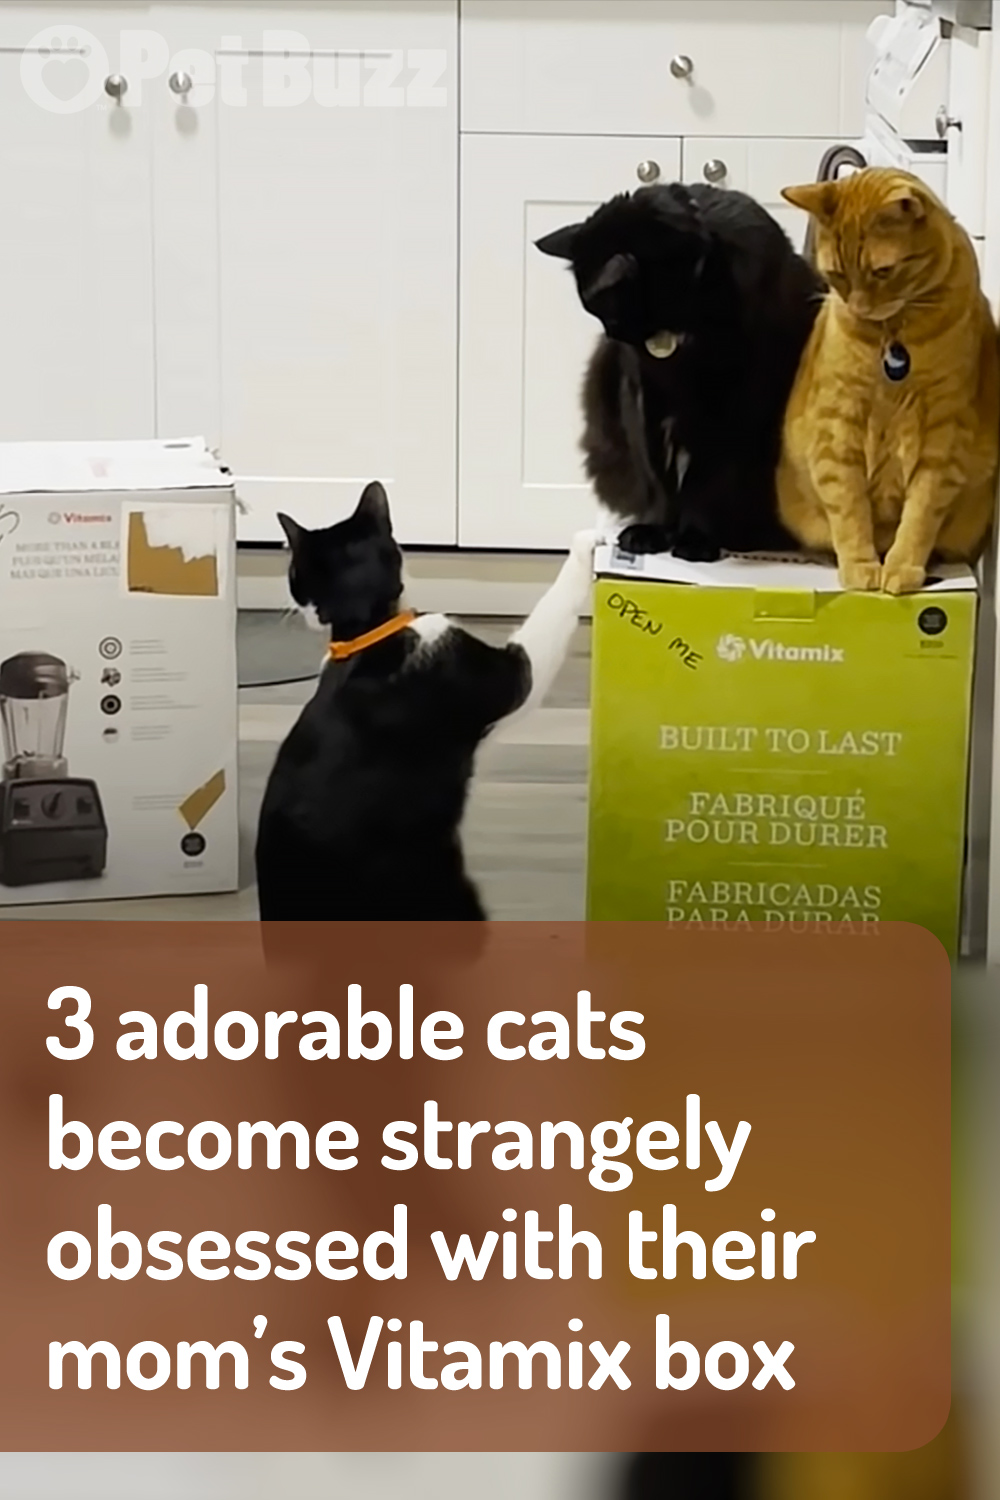 3 adorable cats become strangely obsessed with their mom’s Vitamix box